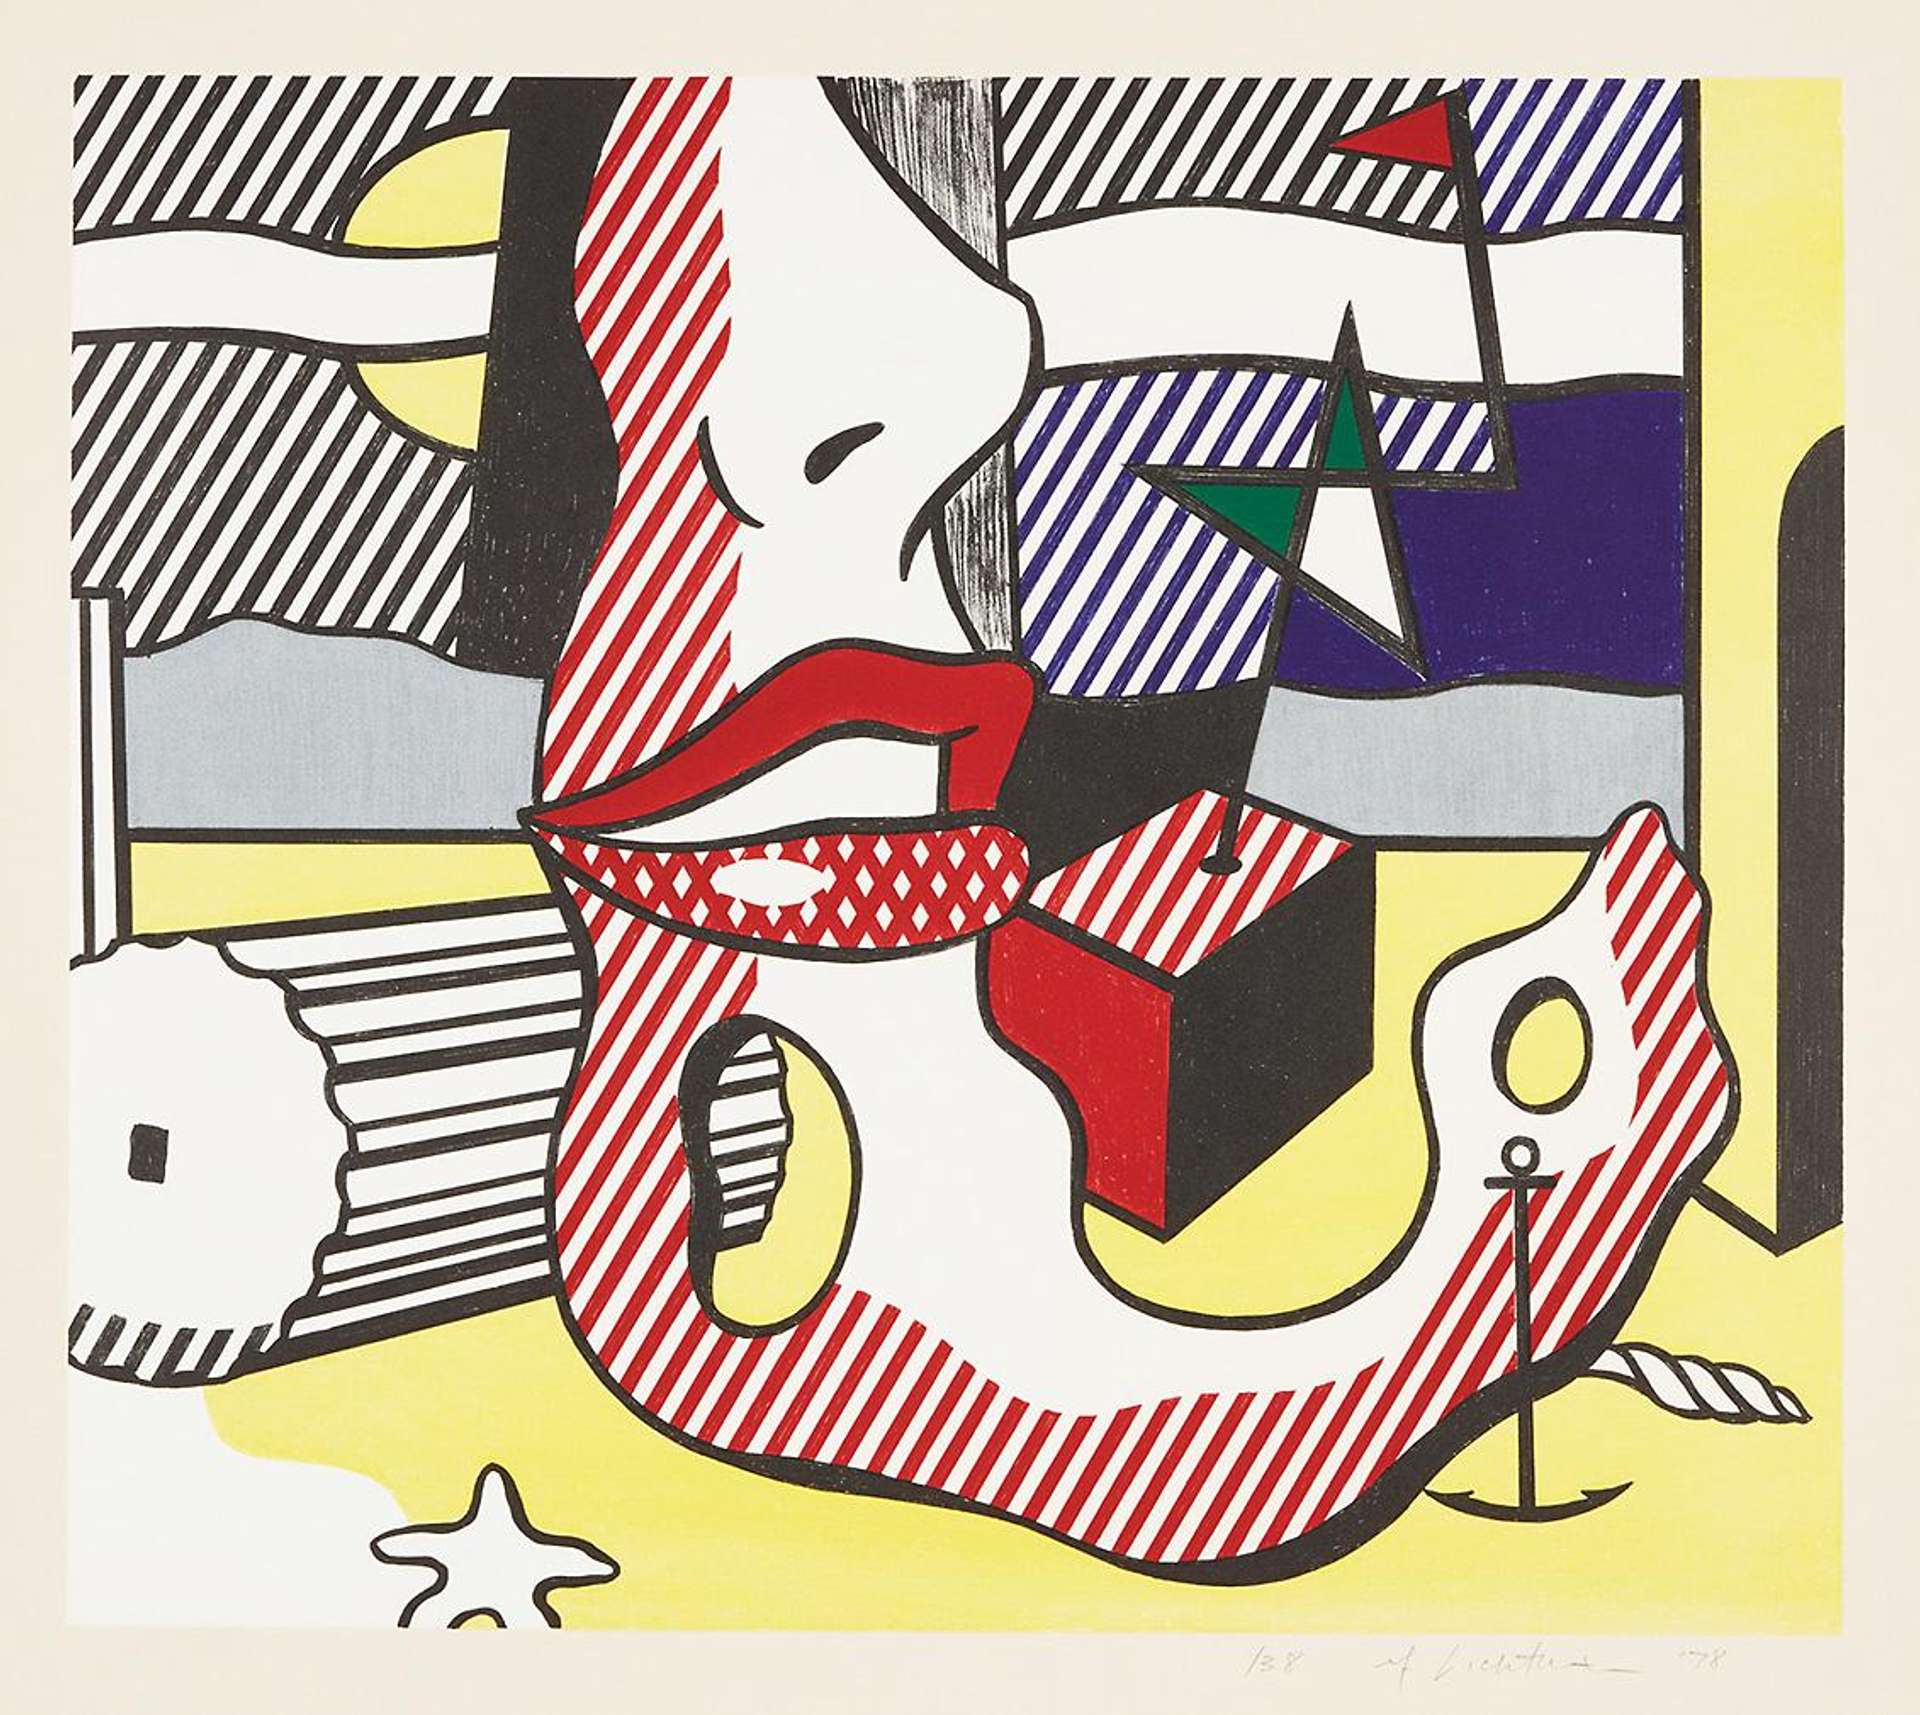 An amorphous main character in the centre with no body. Her face recalls the emotional charge of the artist’s 1960s cartoon heroines. Protruding geometric shapes appear in the background of the work, rendered in yellow, red, black and blue hues.